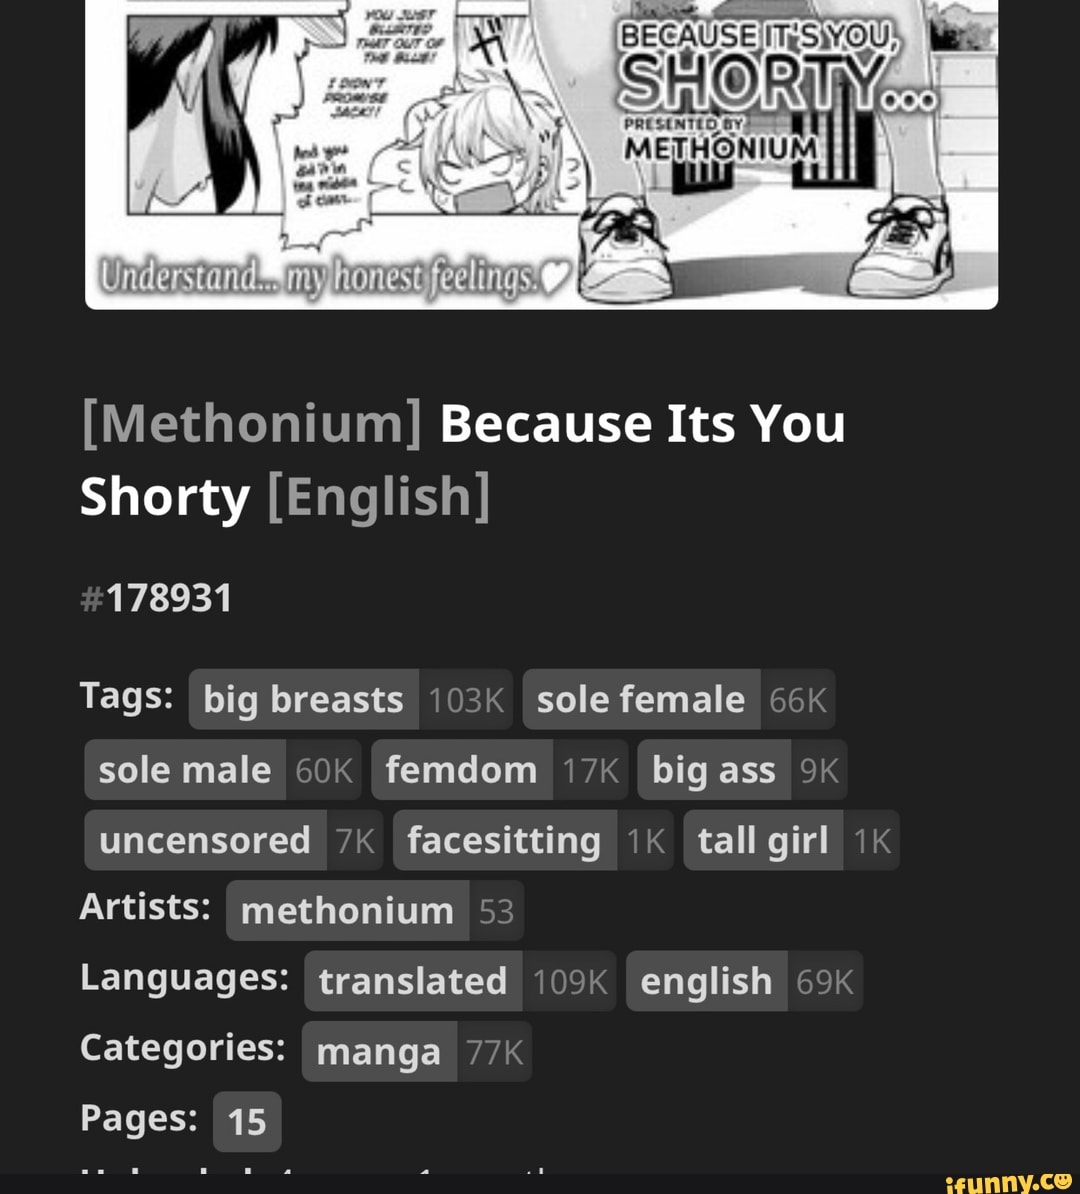 Methonium because it's you shorty